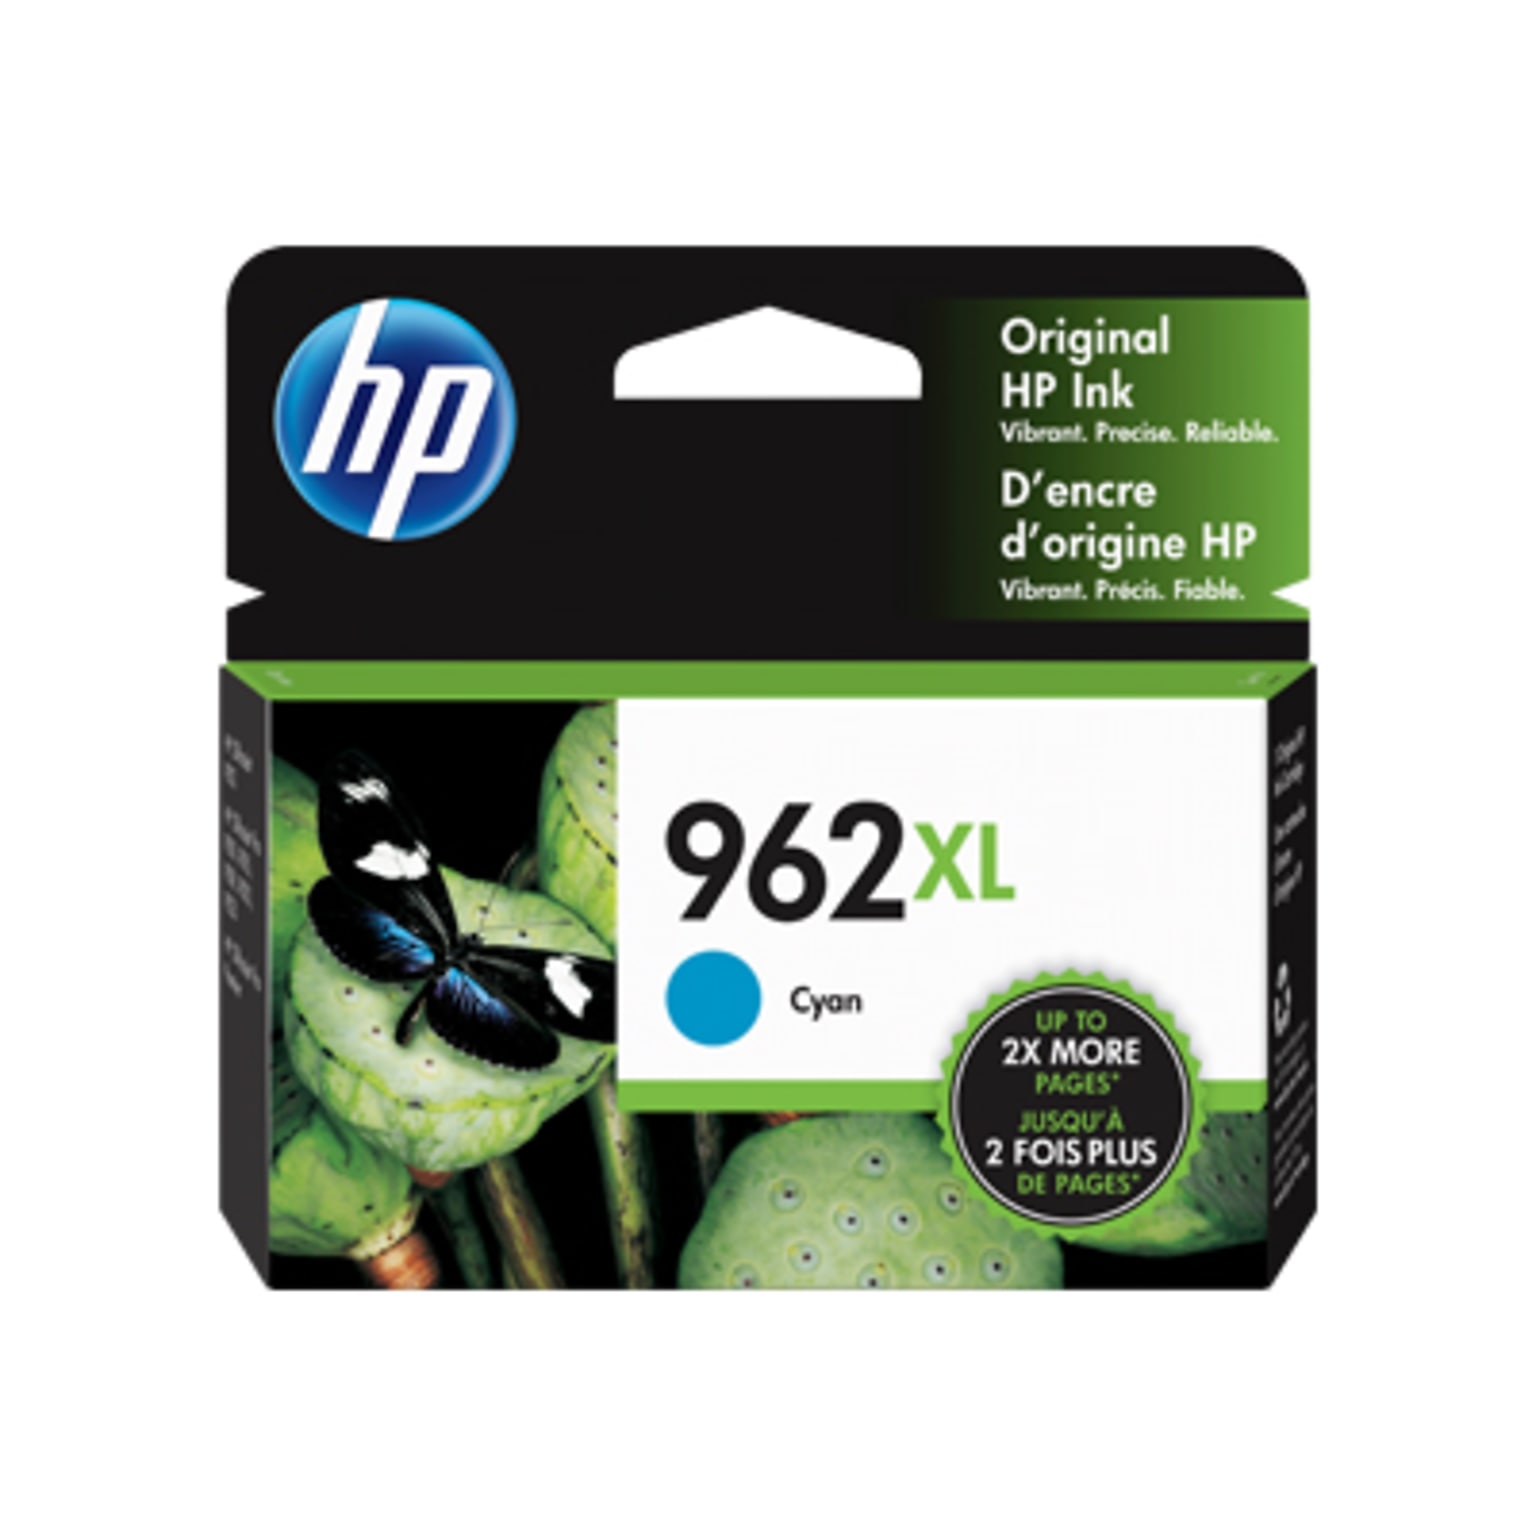 HP 962XL Cyan High Yield Ink Cartridge (3JA00AN#140), print up to 1600 pages